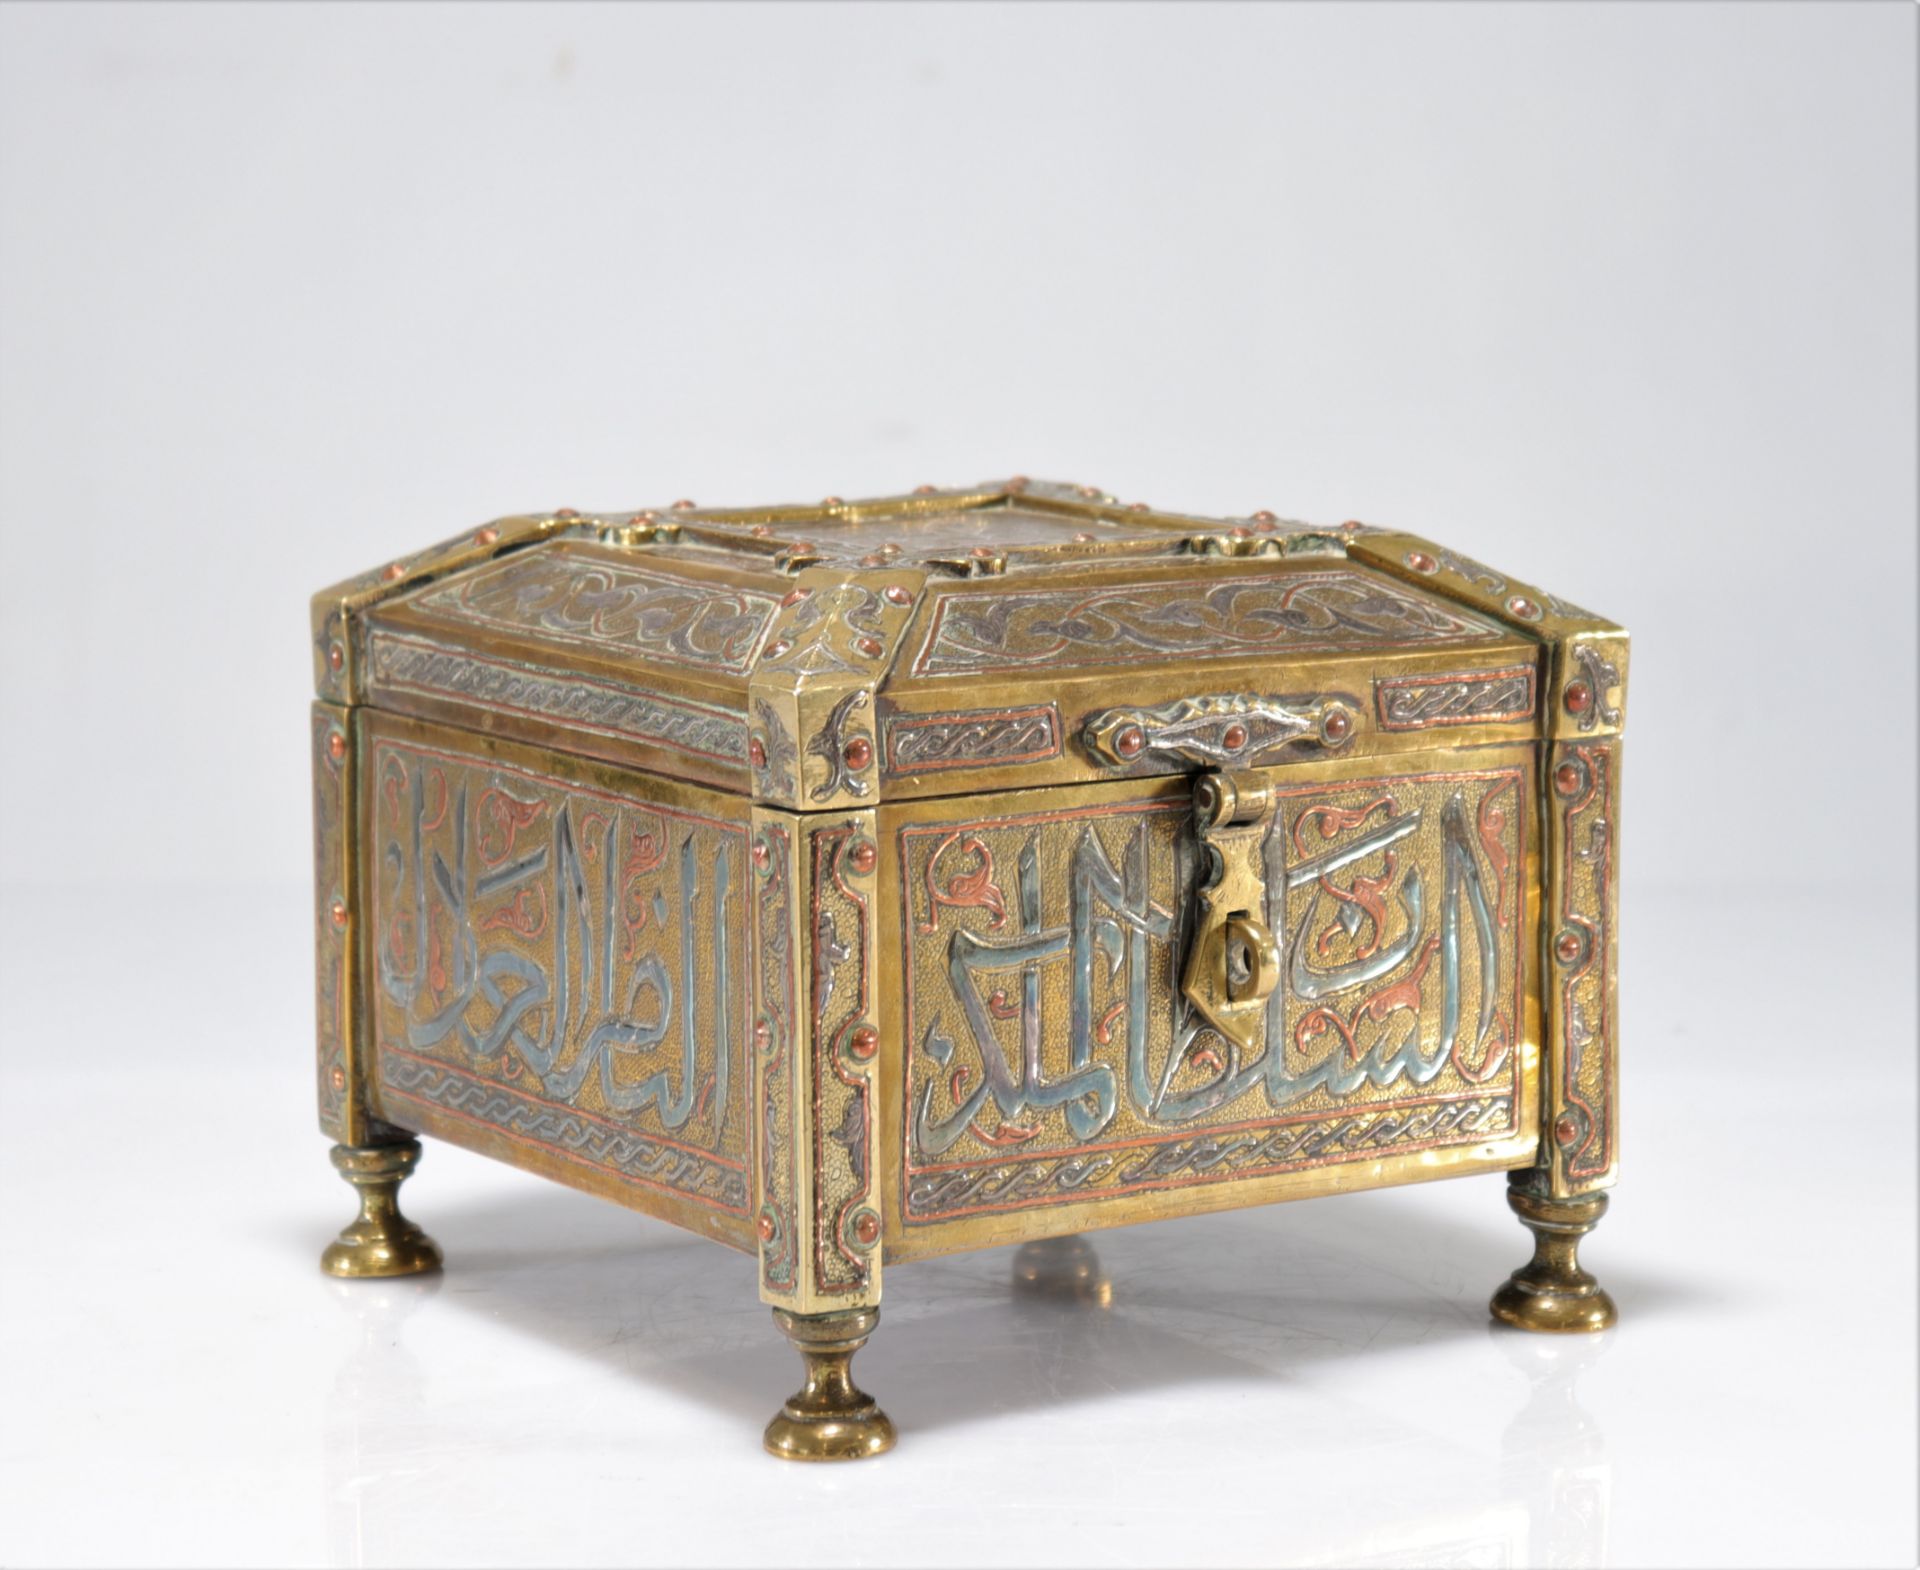 Ottoman box with Koran brass and silver and copper inlay "Cairowe"